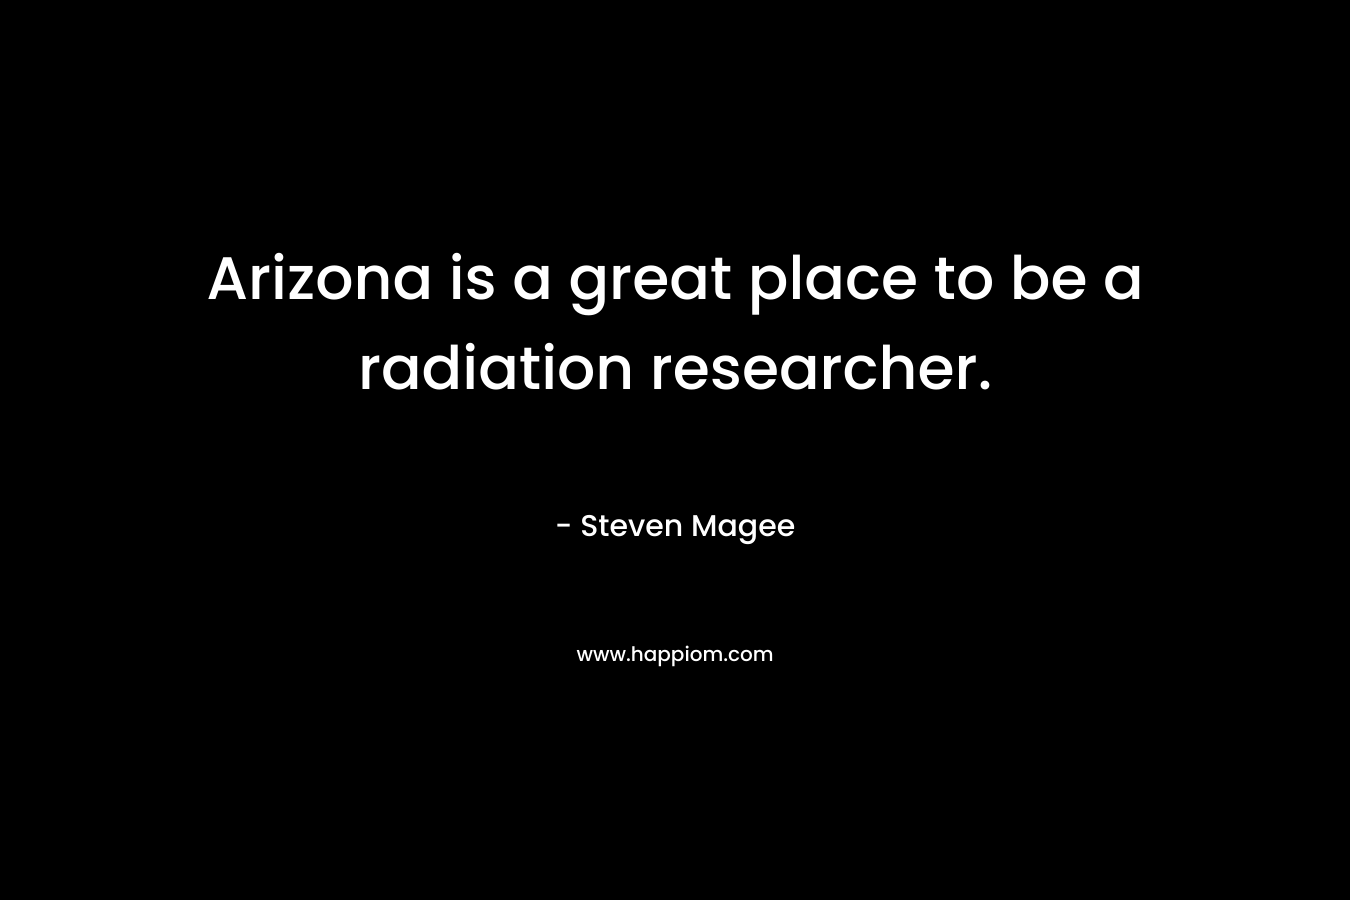 Arizona is a great place to be a radiation researcher.